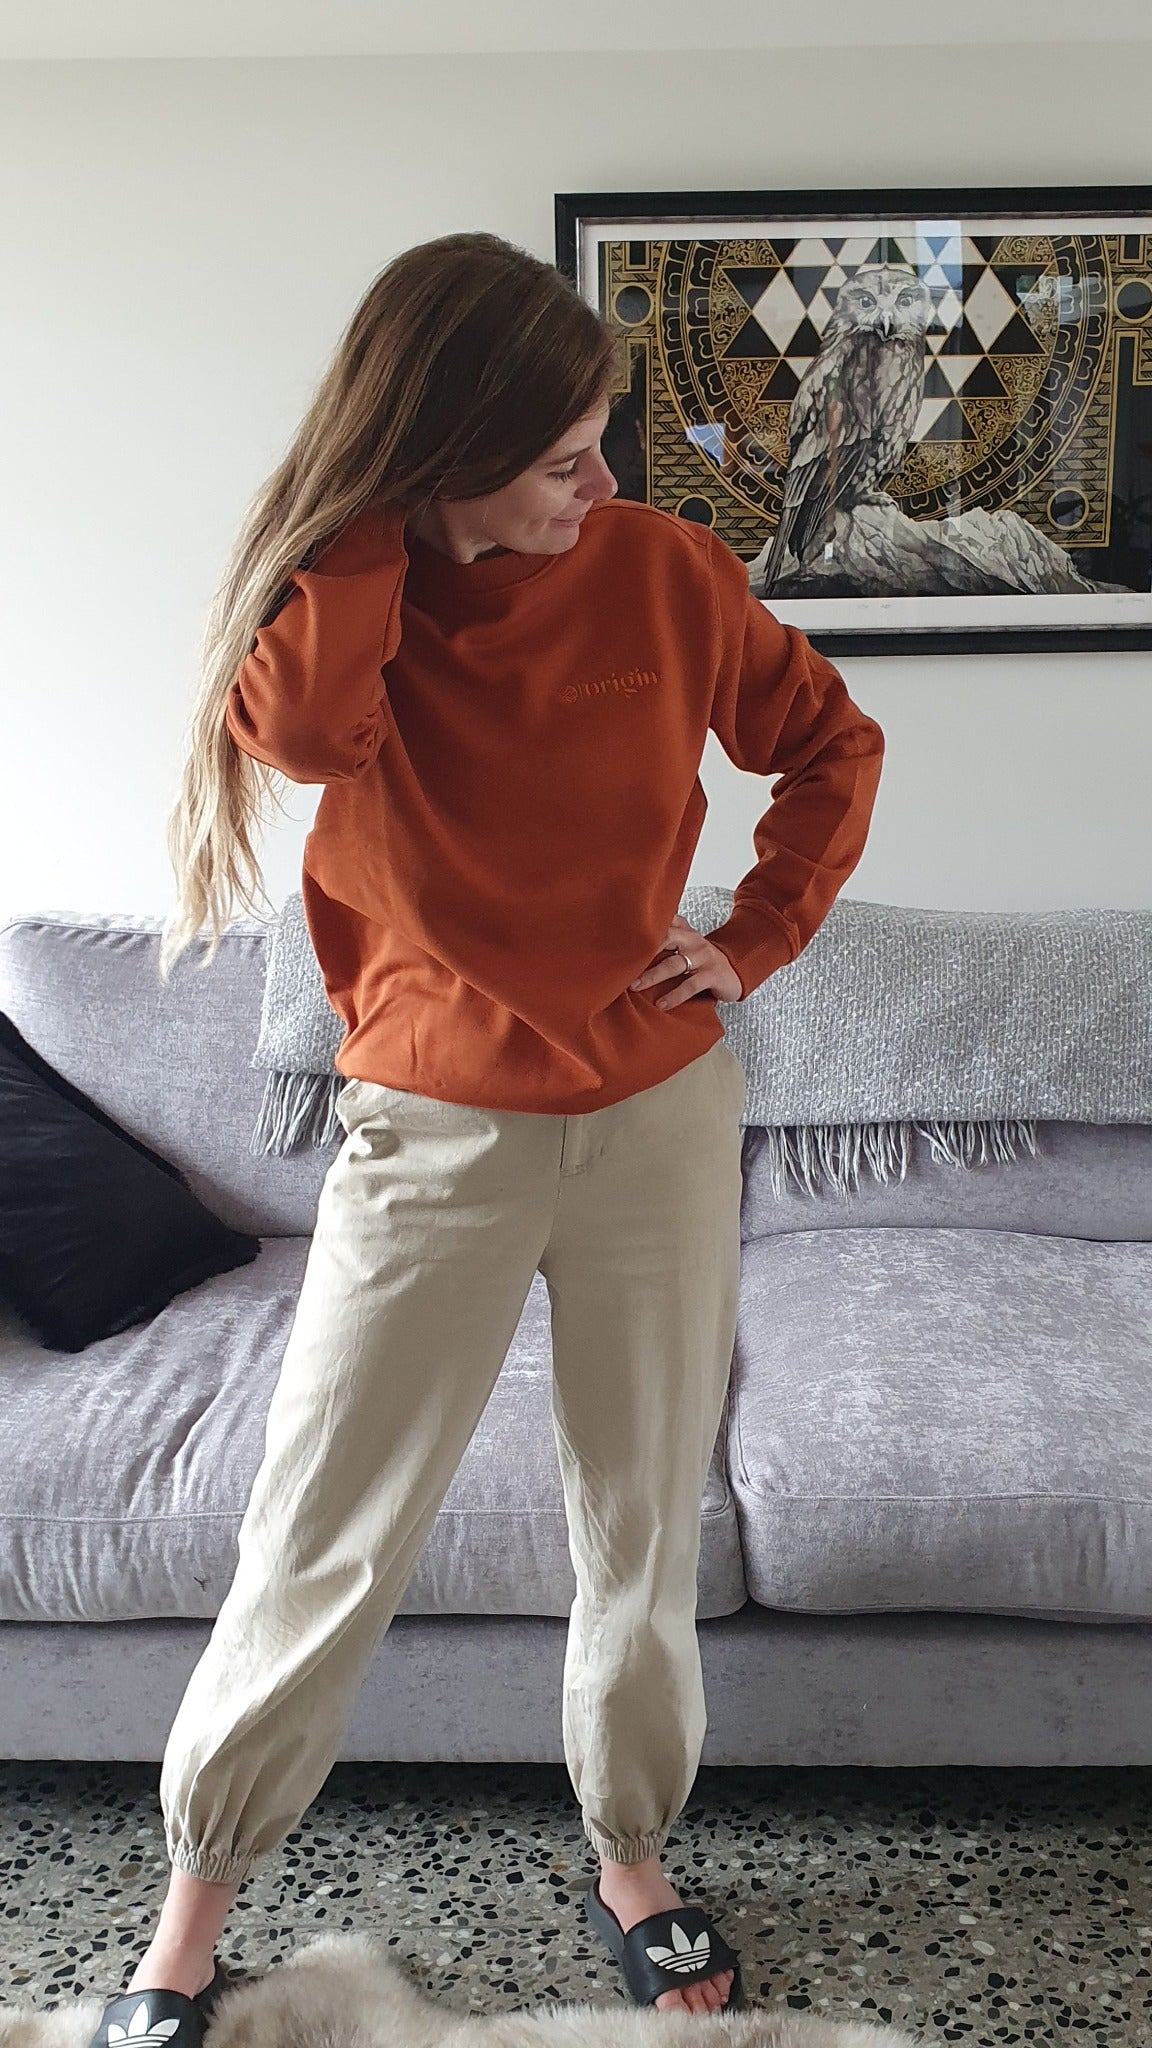 Here is Zoey sporting our Signature Rust Crew at home. This is made of Organic Cotton and Recycled polyester. Zoey wears a Medium so that she can fit a shirt or long sleeve comfortably underneath.